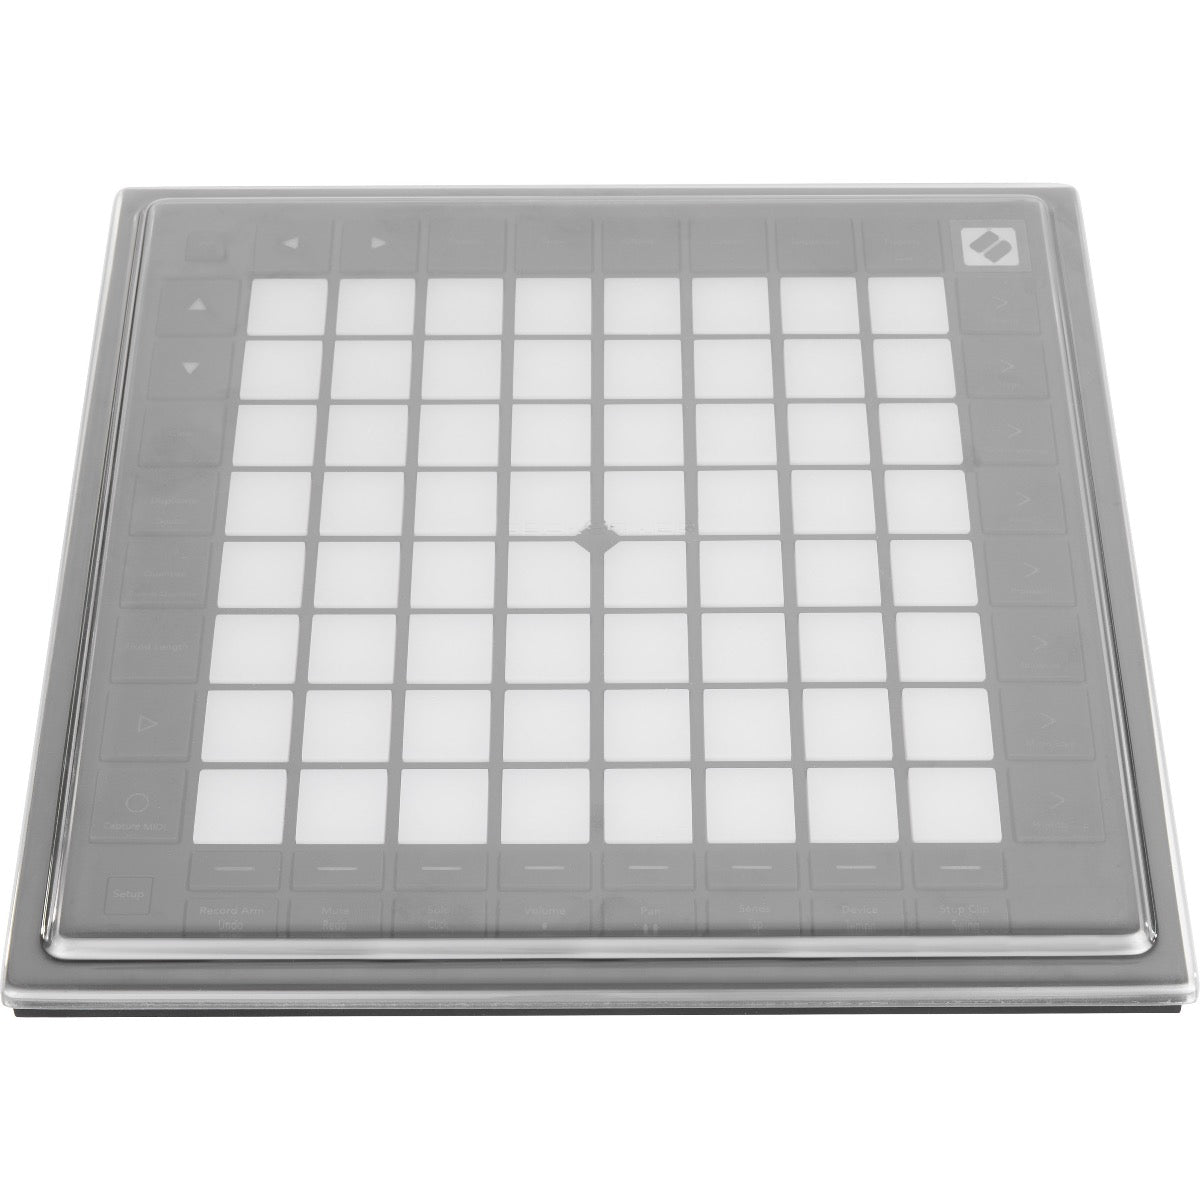 Perspective view of Decksaver Novation Launchpad Pro MK3 Cover showing top and front